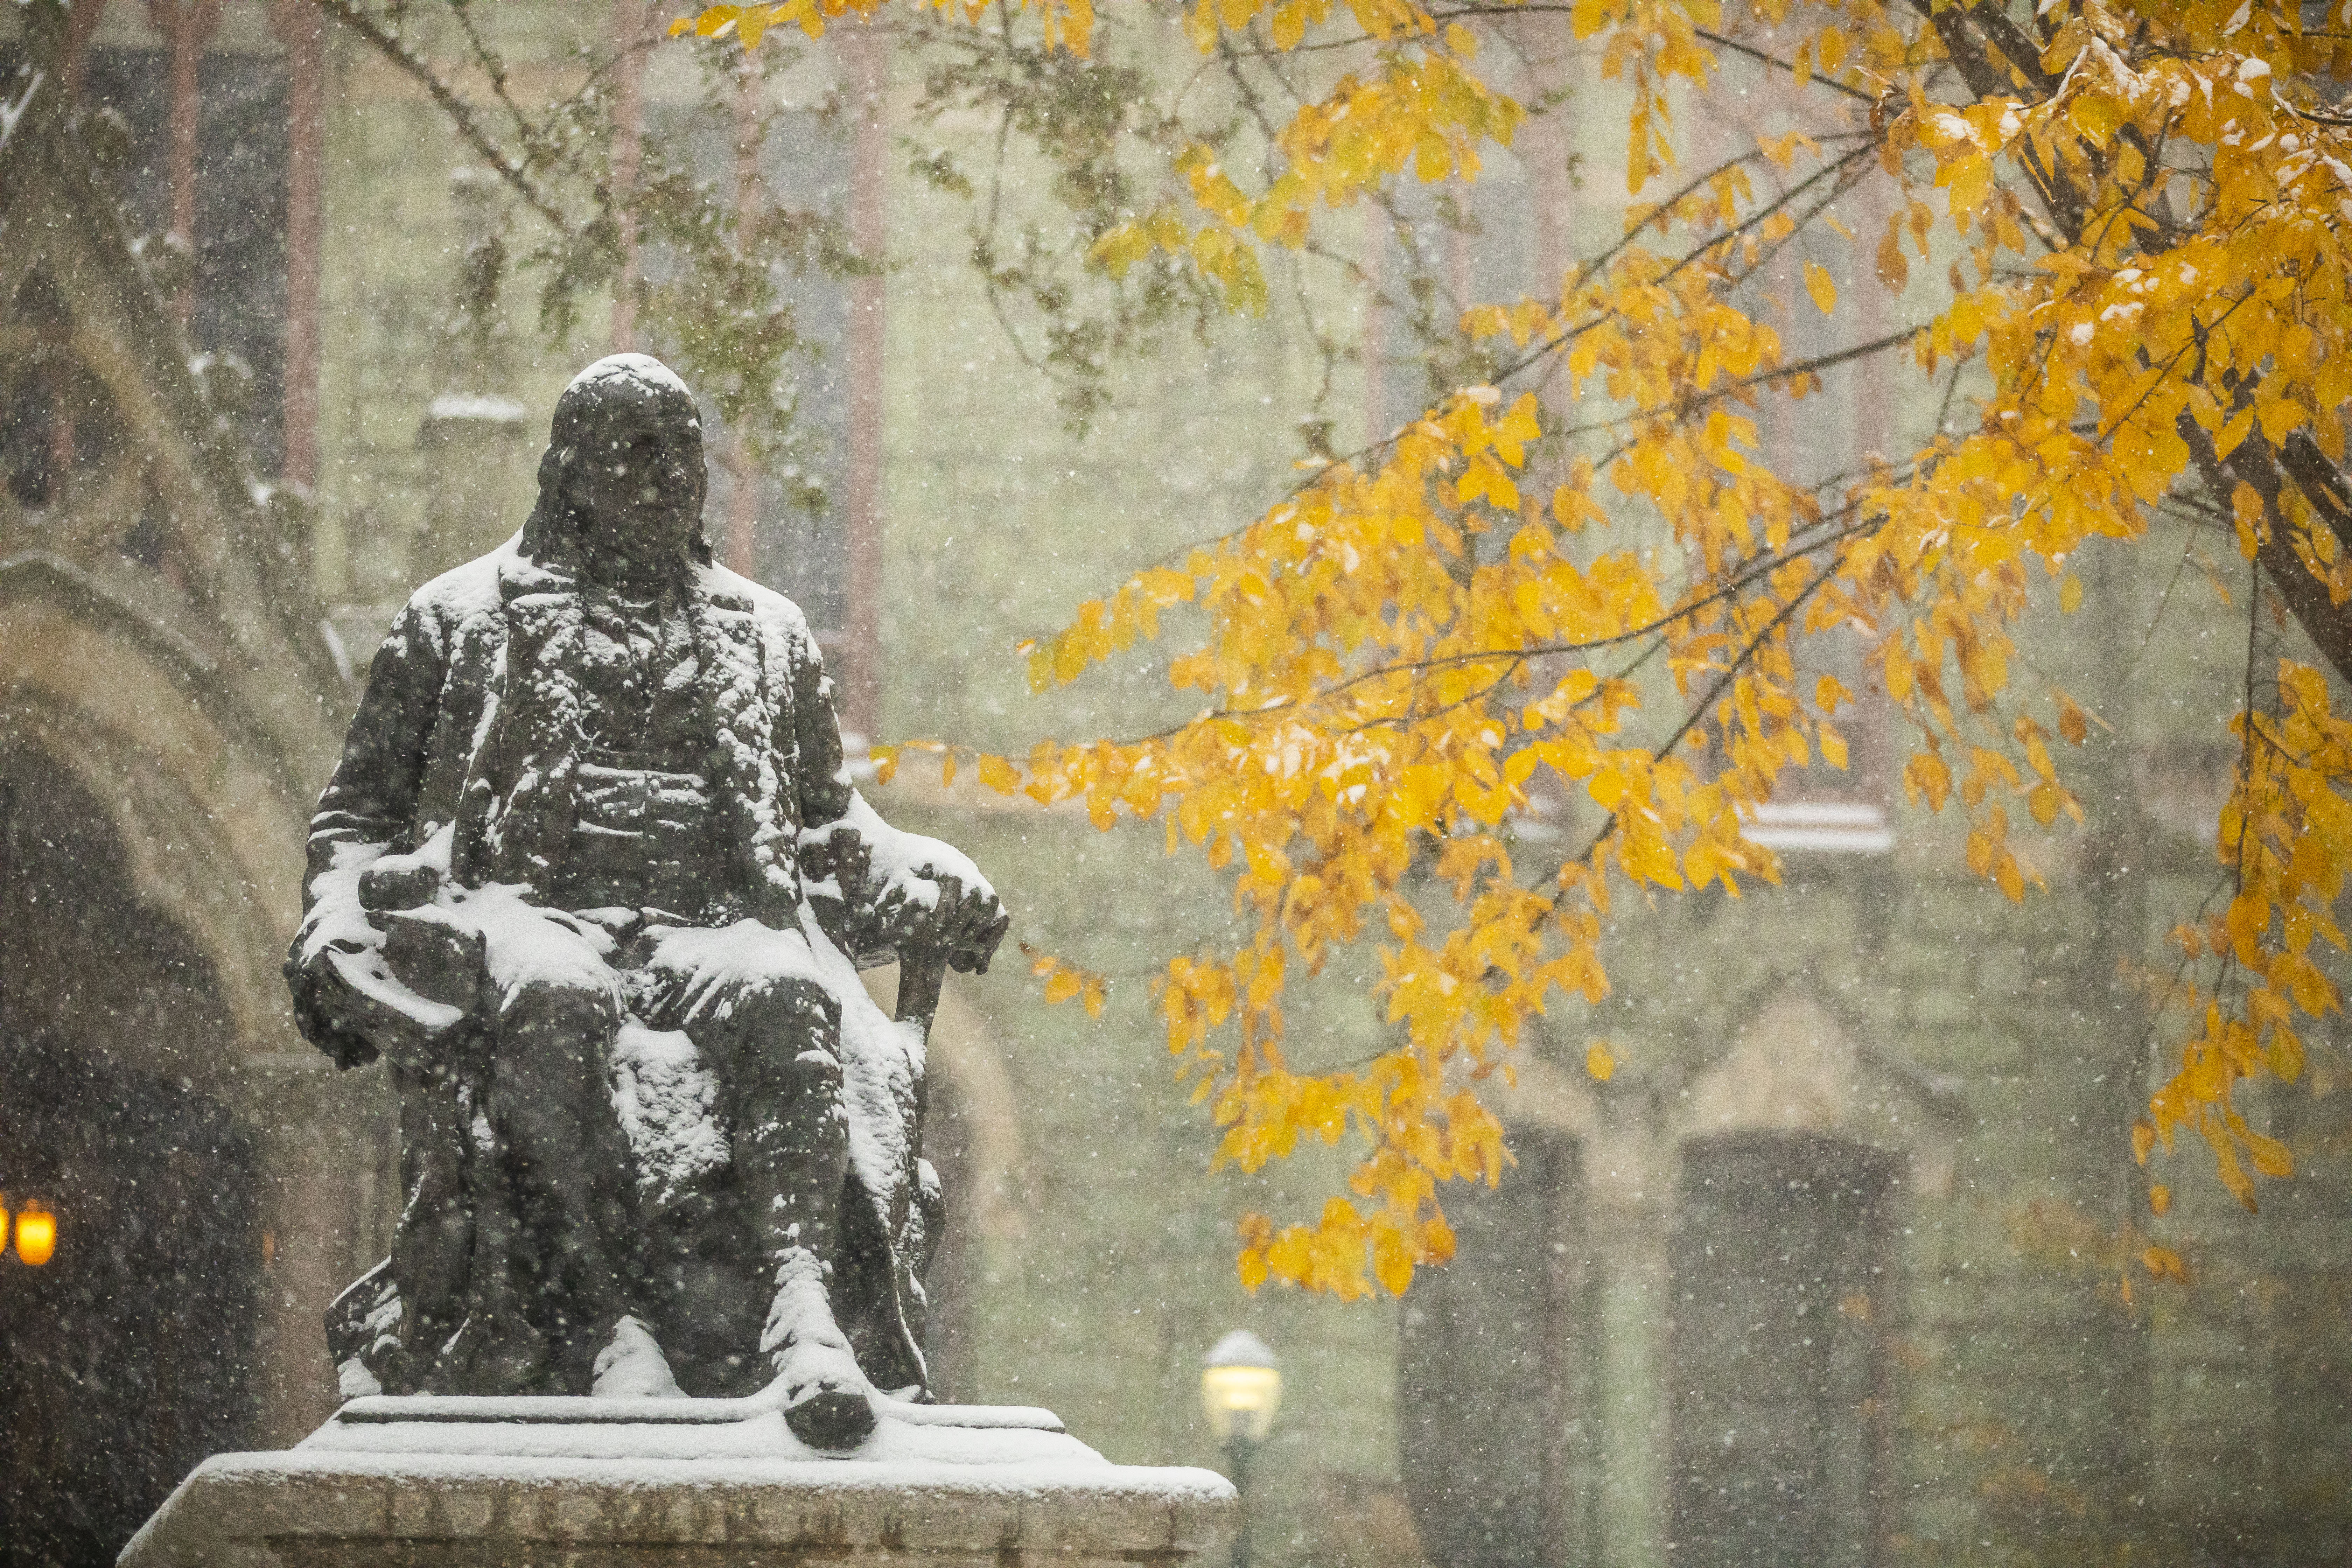 Snow beginning to acculumlate on Ben Franklin statue in front of College Hall